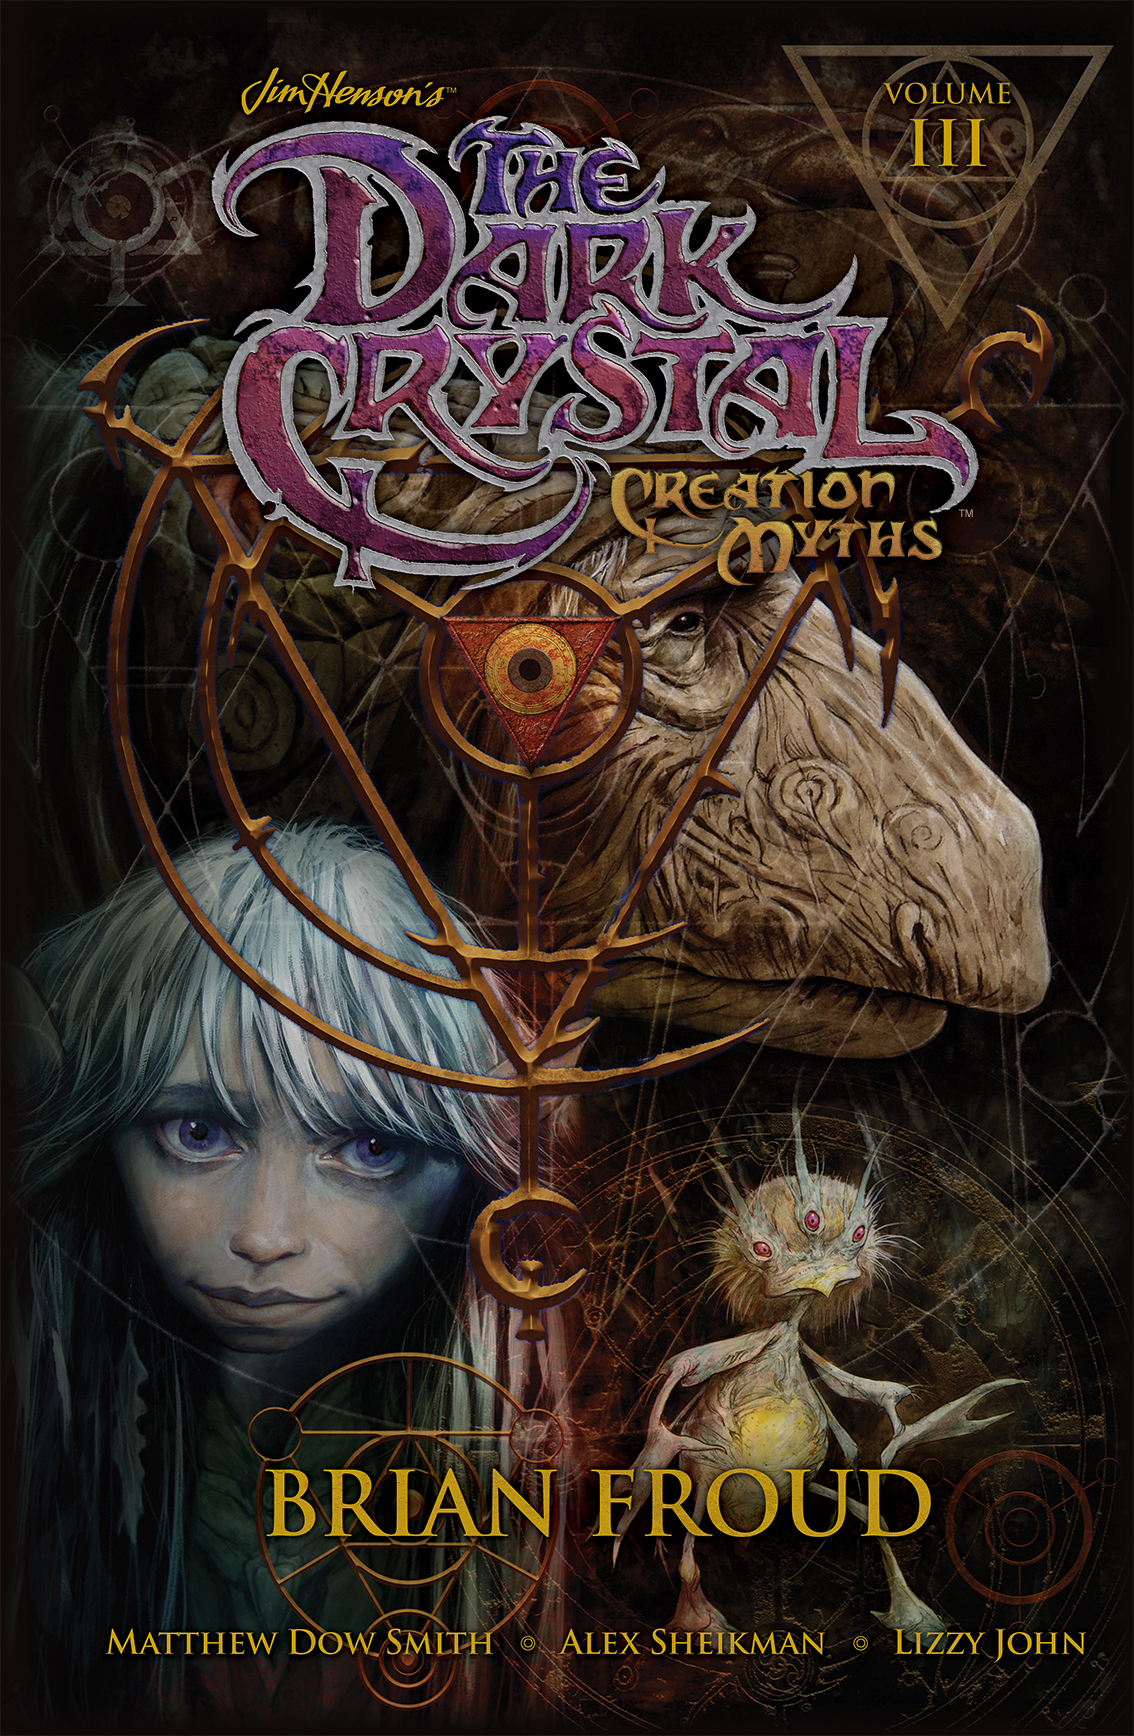 Friday Reads: The Dark Crystal: Creation Myths Volume III by Brian Froud